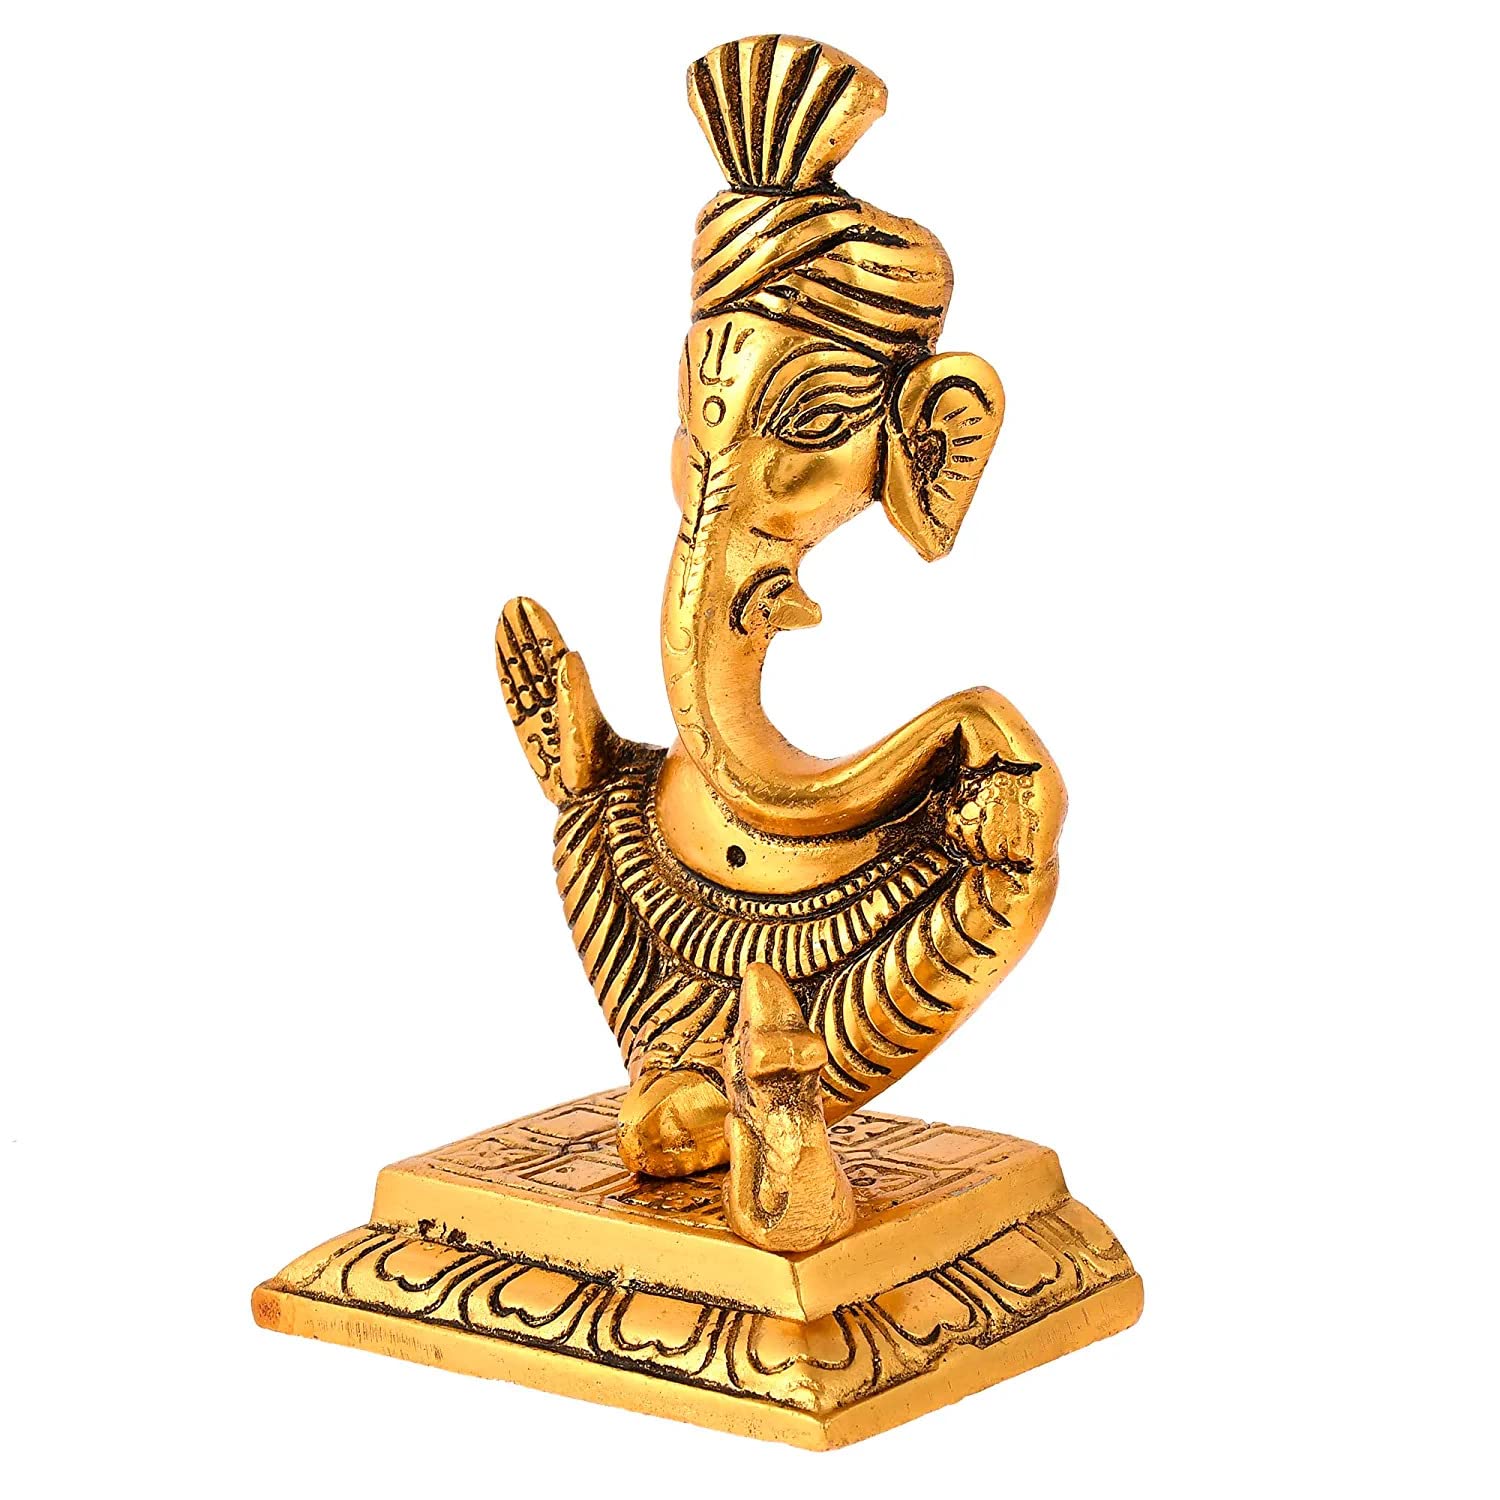 Metal Handcrafted Ganesh Idol, Height 15 cm, Gold Antique